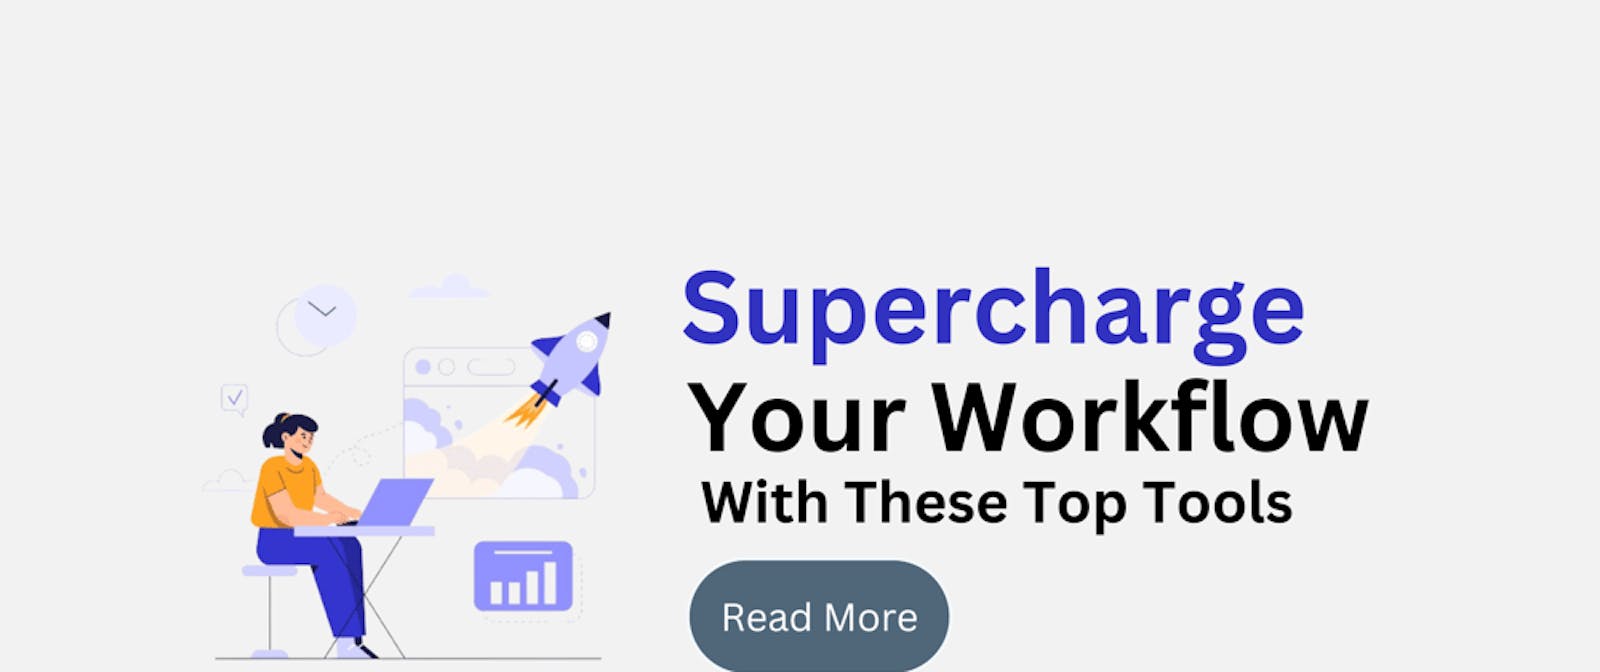 Supercharge Your Workflow with These Top Tools